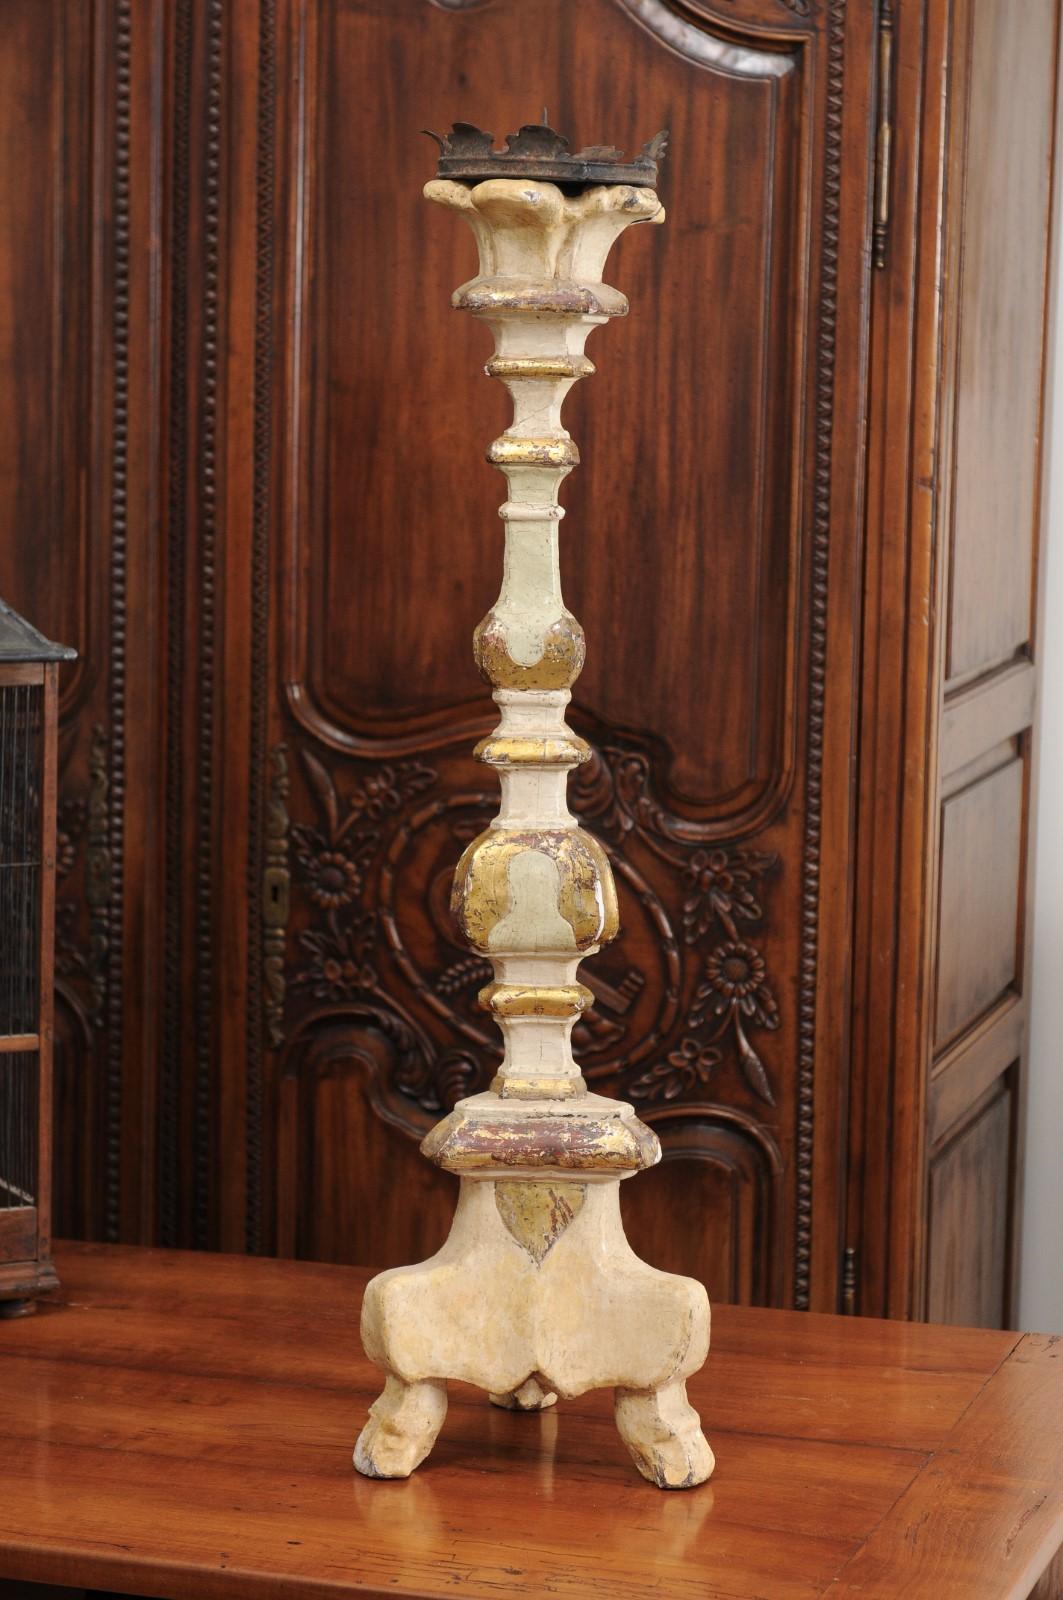 An Italian 18th century painted wood candlestick from Tuscany with touches of gilt. Created in central Italy during the 18th century, this Tuscan candlestick features a painted structure delicately accented with gilt highlights. Topped with a metal